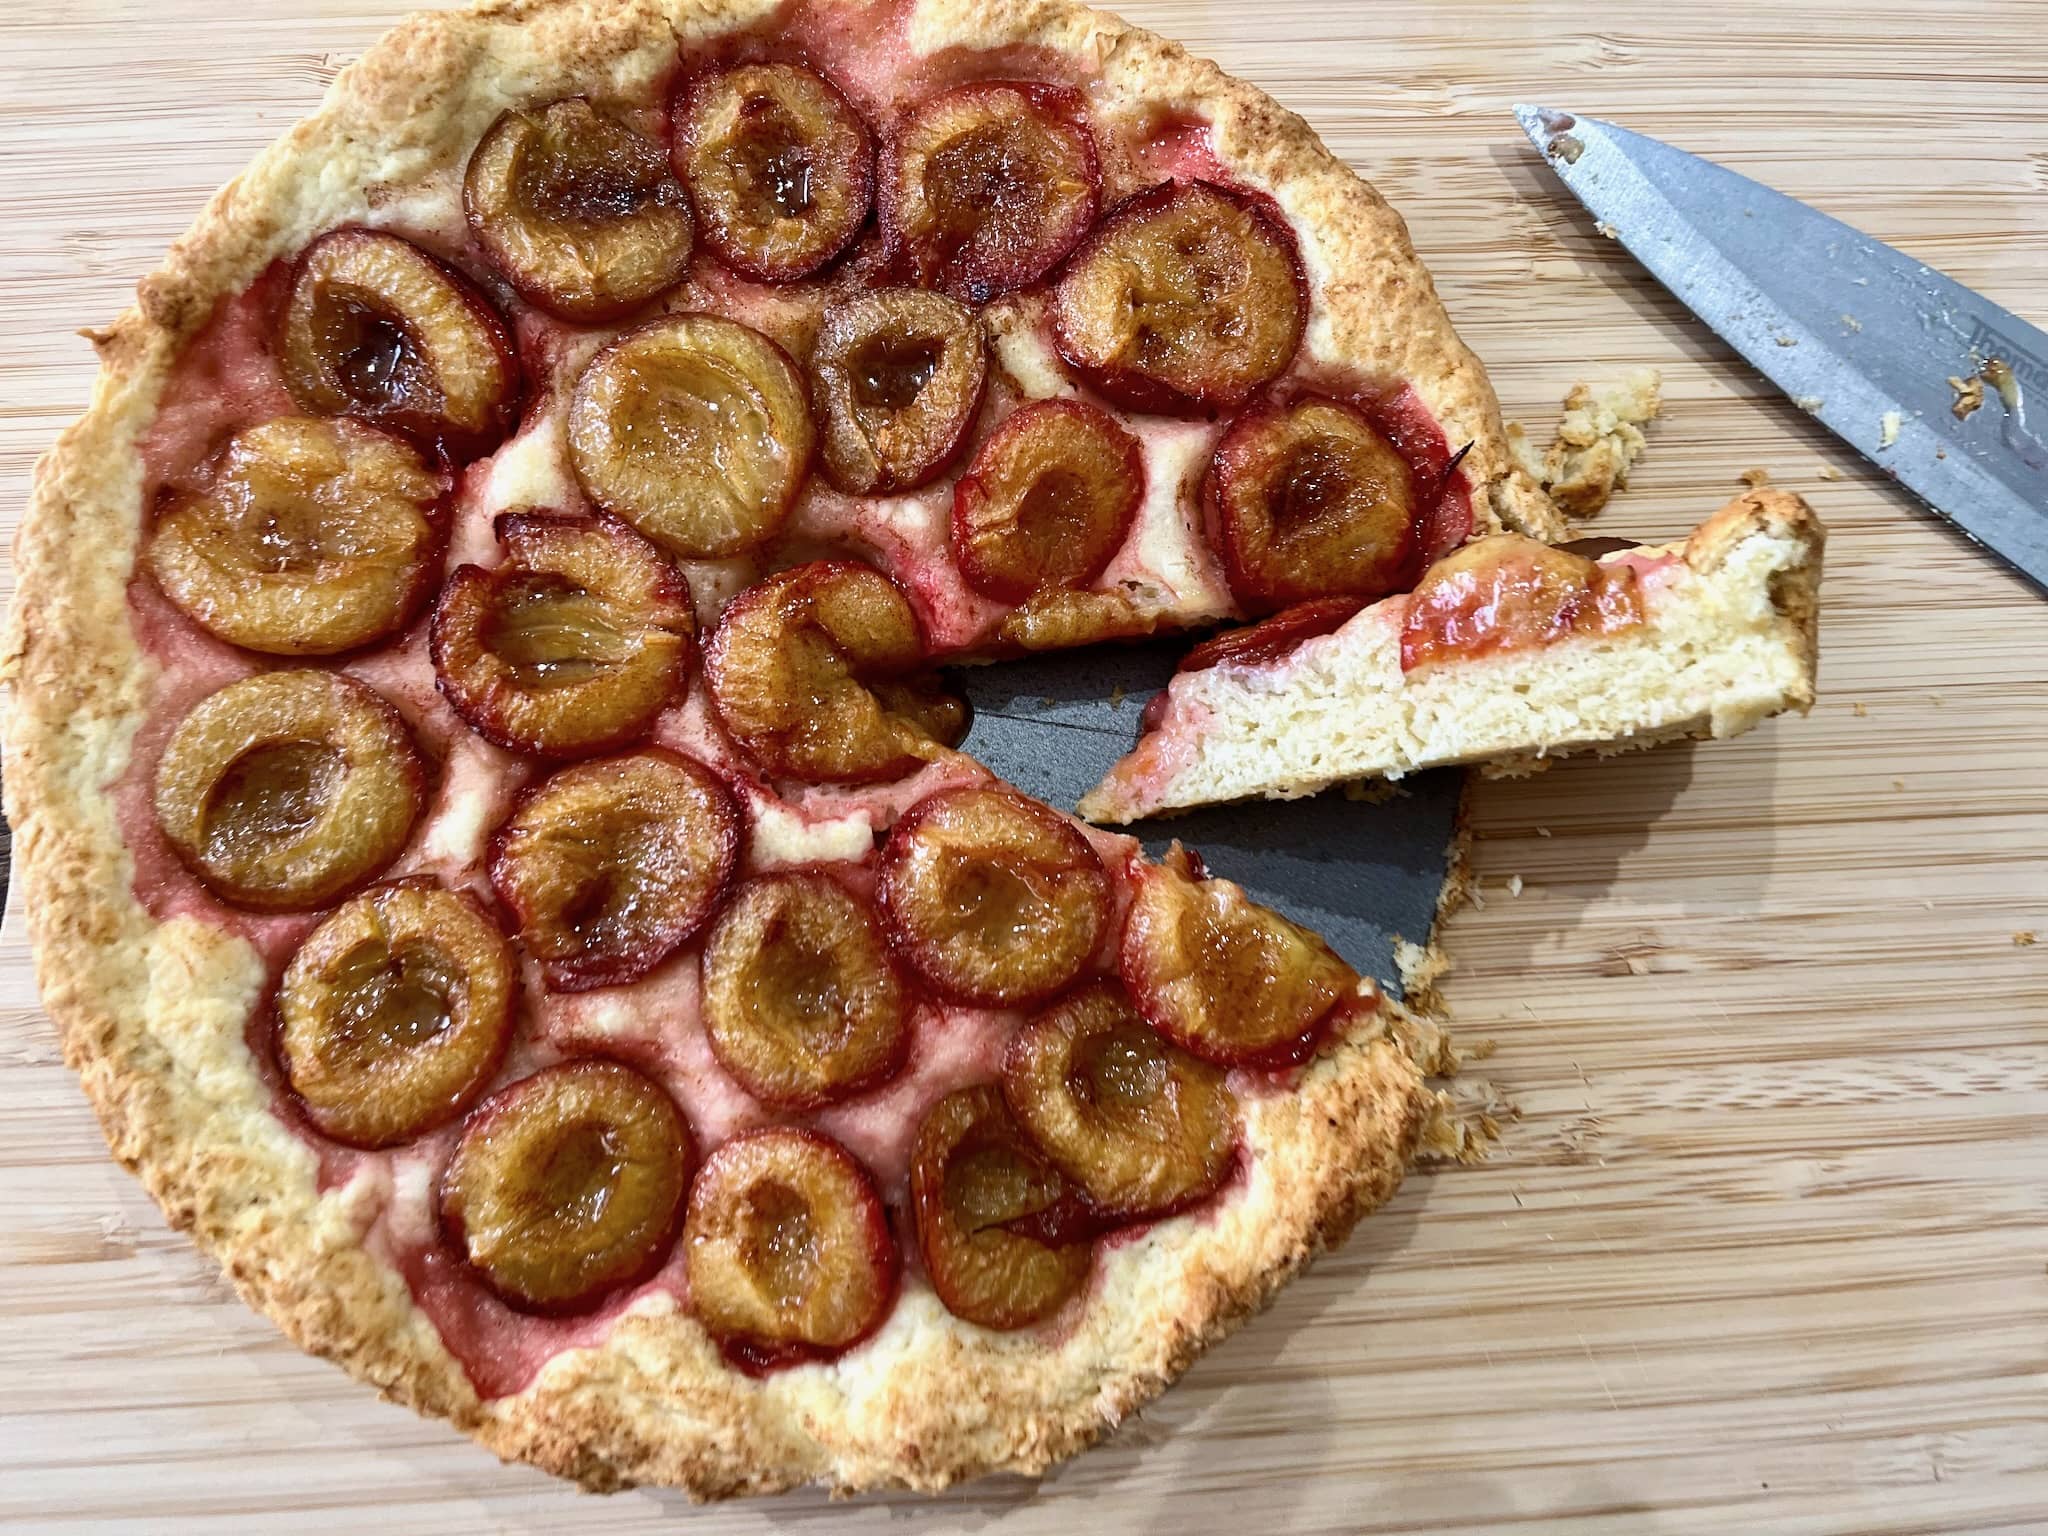 Baked plum tart taken out from the tin crust with a sliced piece